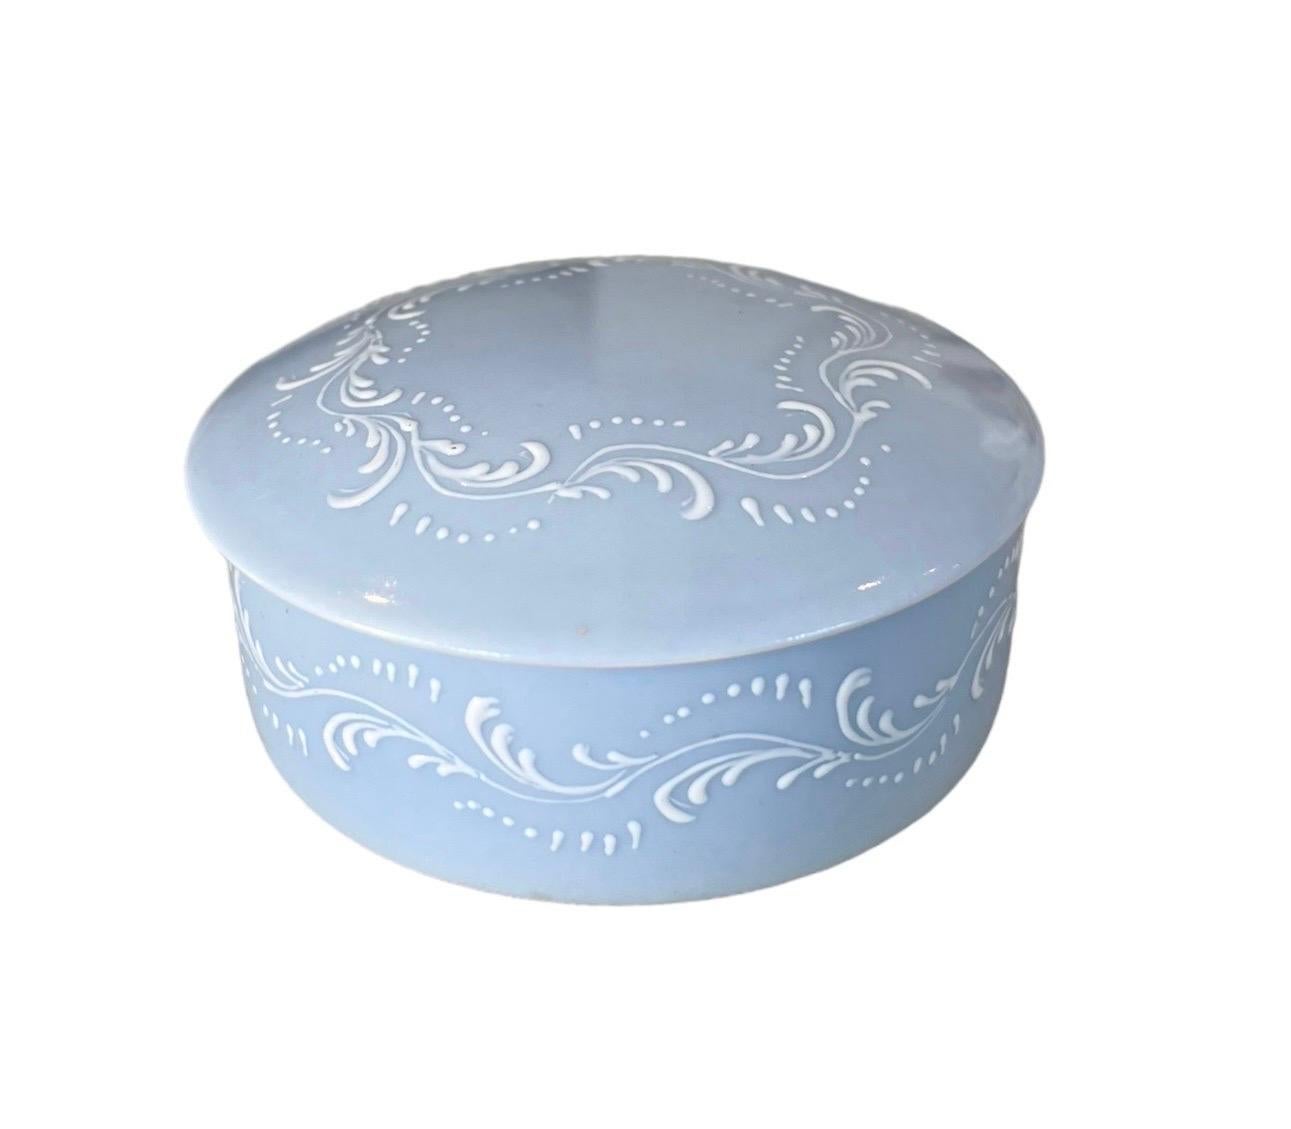 Very pretty little box, bonbonniere in Limoges porcelain, creation by Maison Baud Paris.
The blue color is very delicate, in a pastel tone and the embossed and hand-painted white foliage patterns are very delicate.
The whole thing is extremely